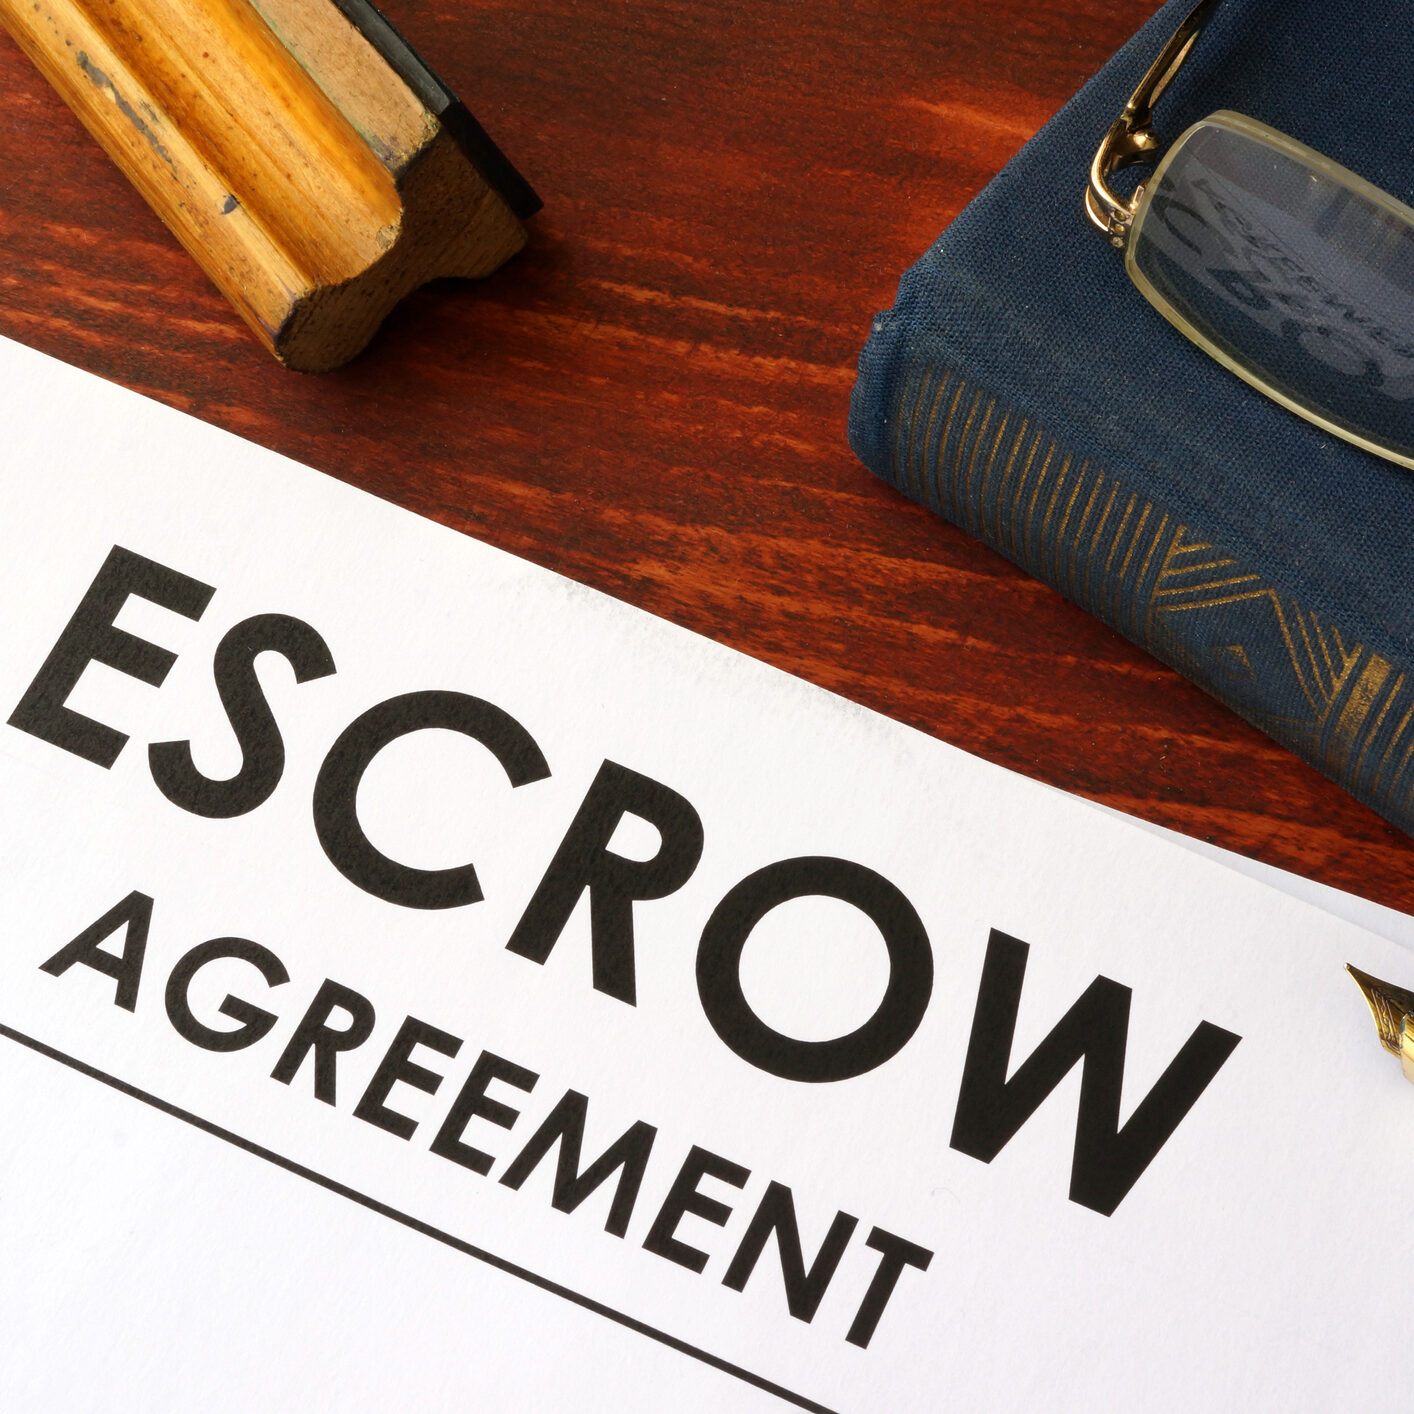 Document with title escrow agreement.